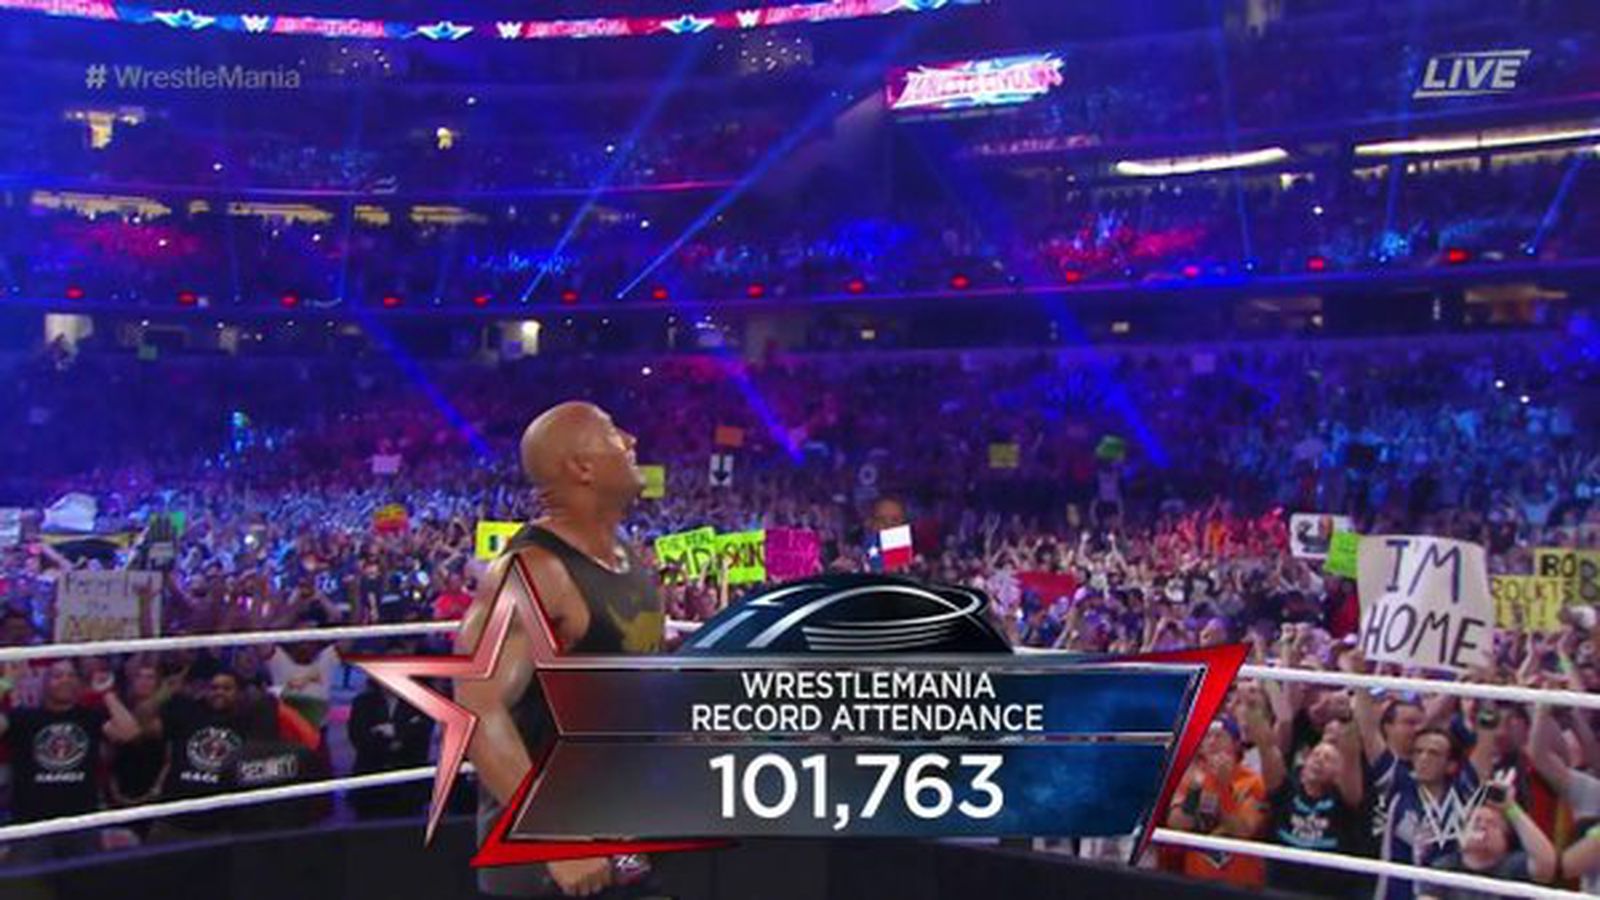 WrestleMania 32 sets attendance record with 101,763 at AT&T Stadium